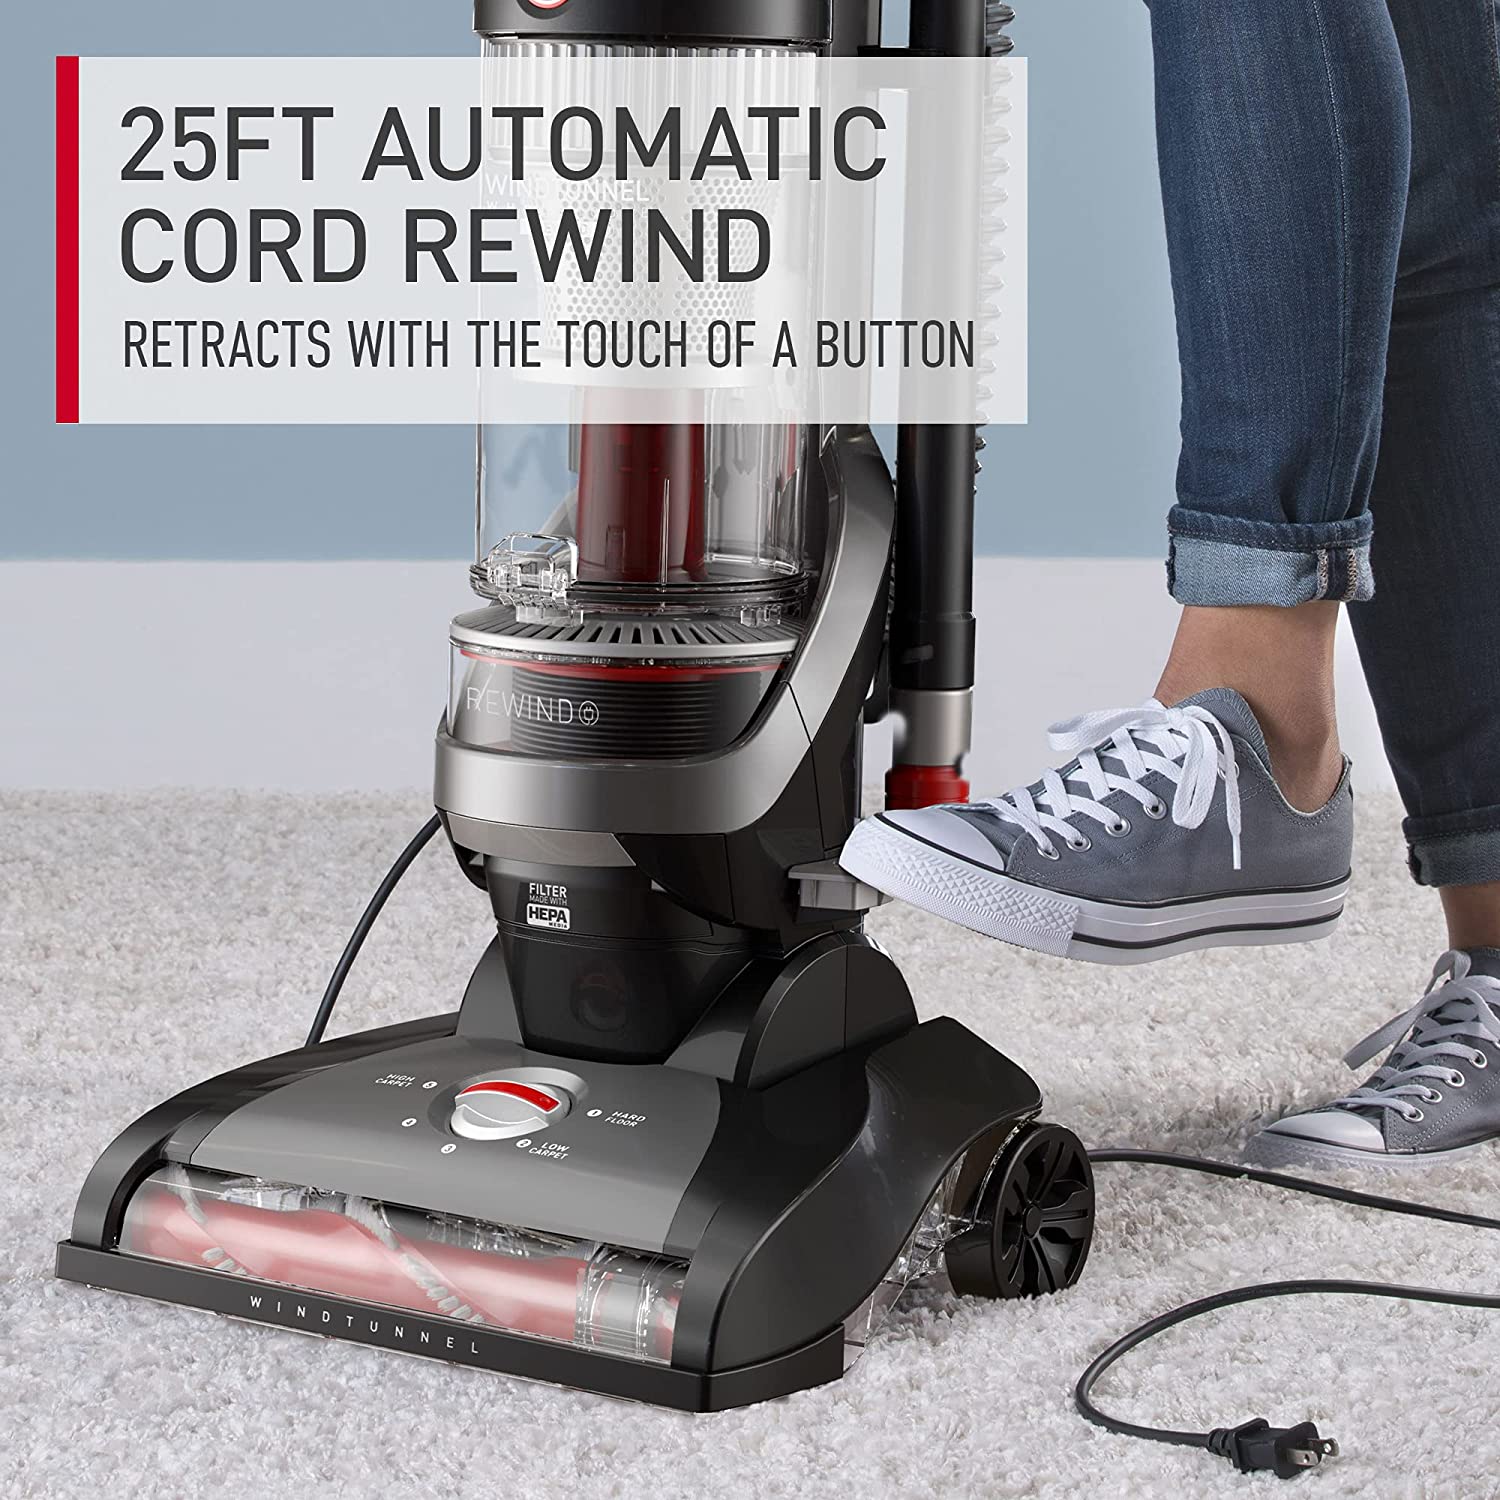 https://discounttoday.net/wp-content/uploads/2023/03/Hoover-WindTunnel-Whole-House-Rewind-Corded-Bagless-Upright-Vacuum-Cleaner-For-Carpet-and-Hard-Floors-UH71350V-Black-1.jpg